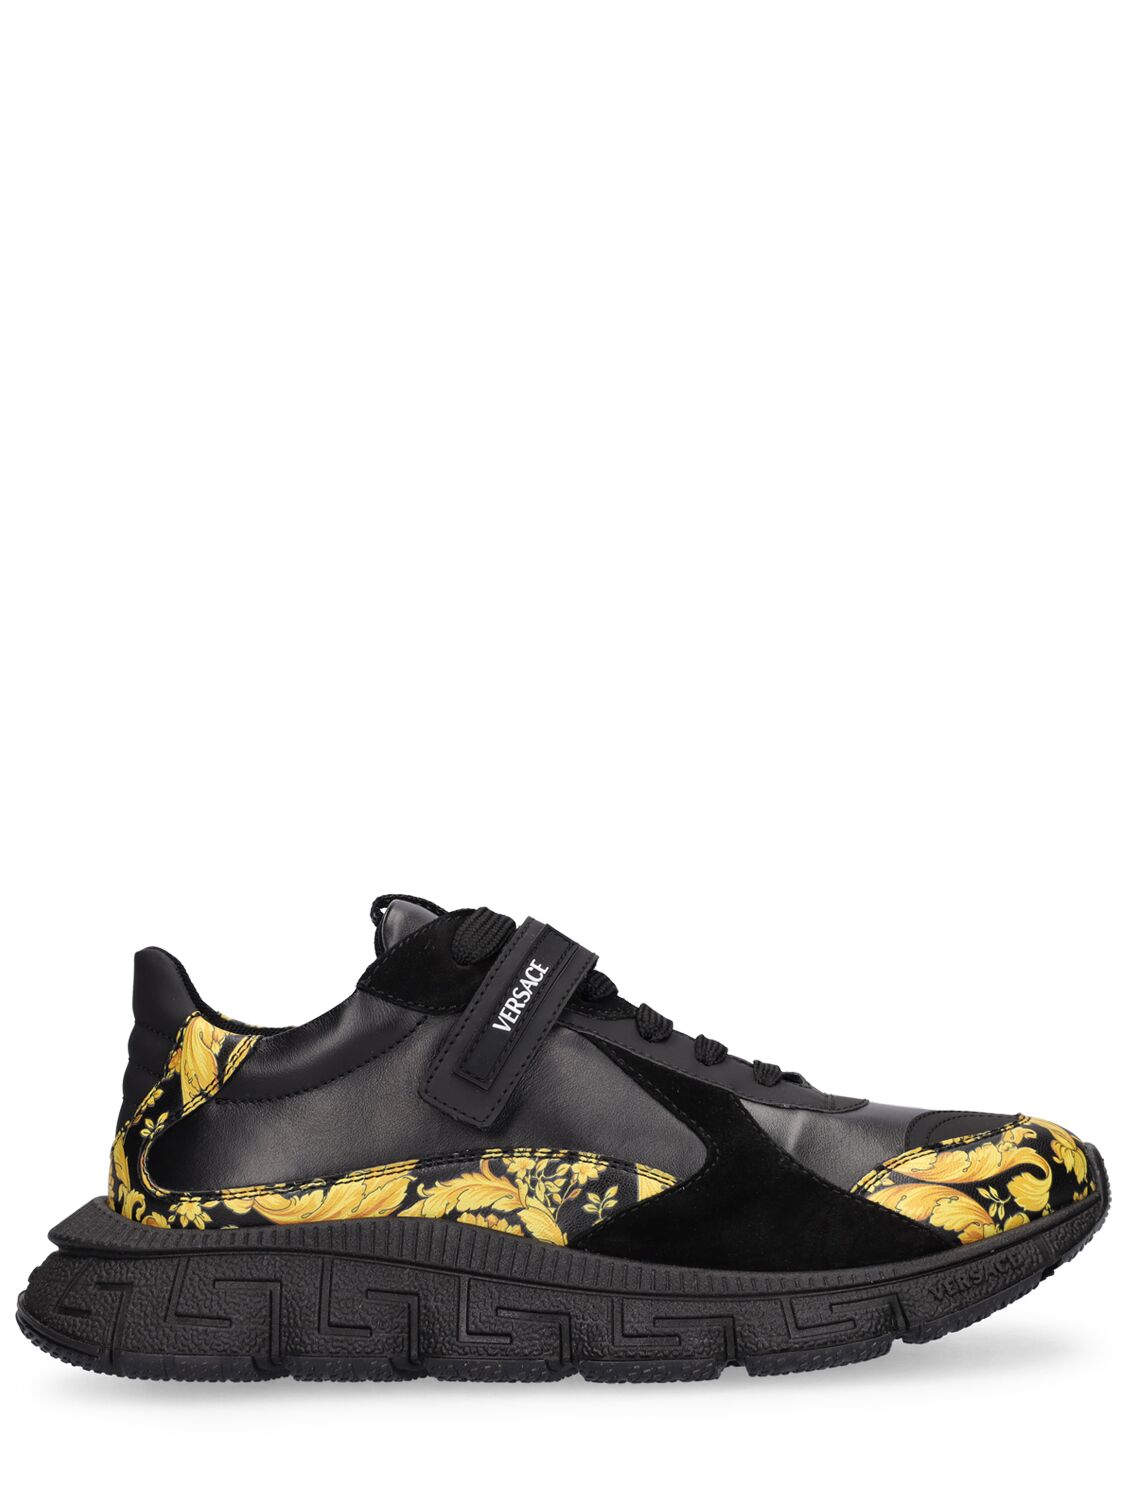 Image of Barocco Printed Leather & Mesh Sneakers